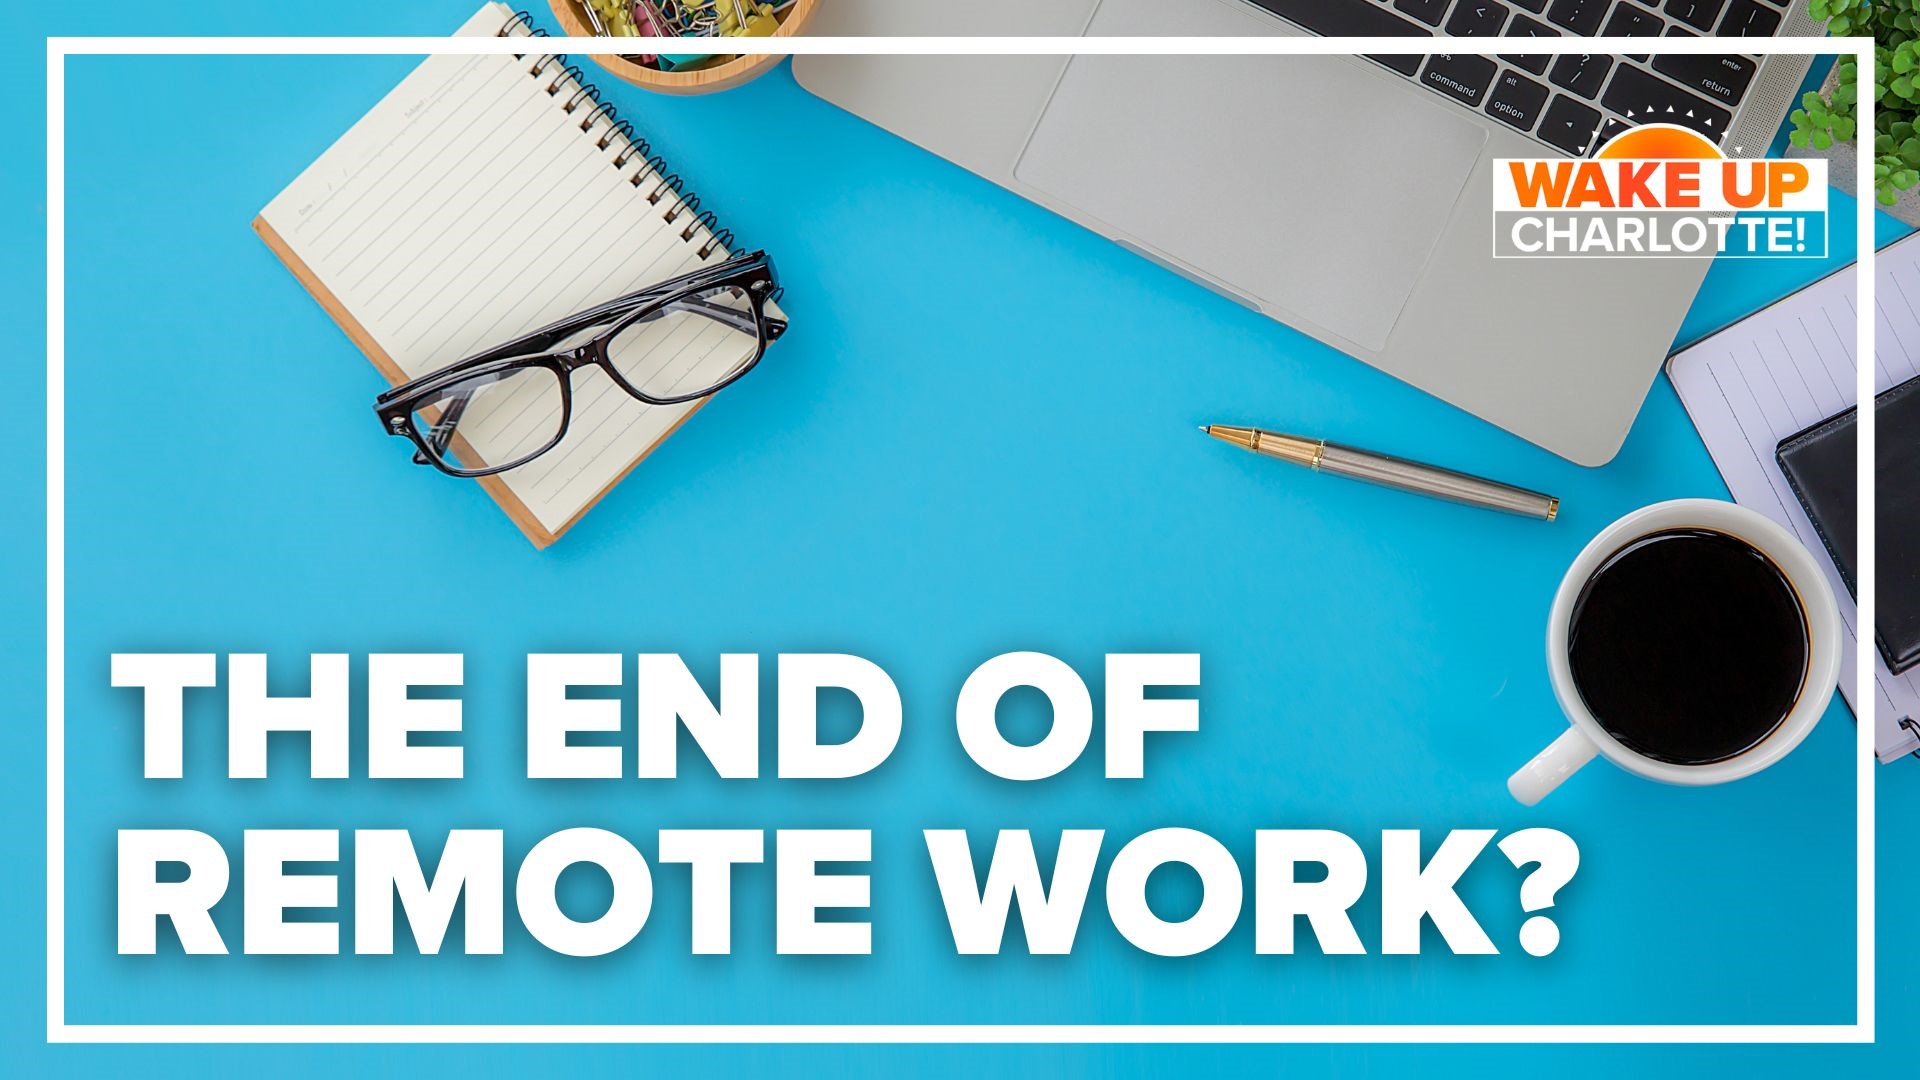 As more companies crack down on remote work, many employees say they're actually more productive working at home. How about you?